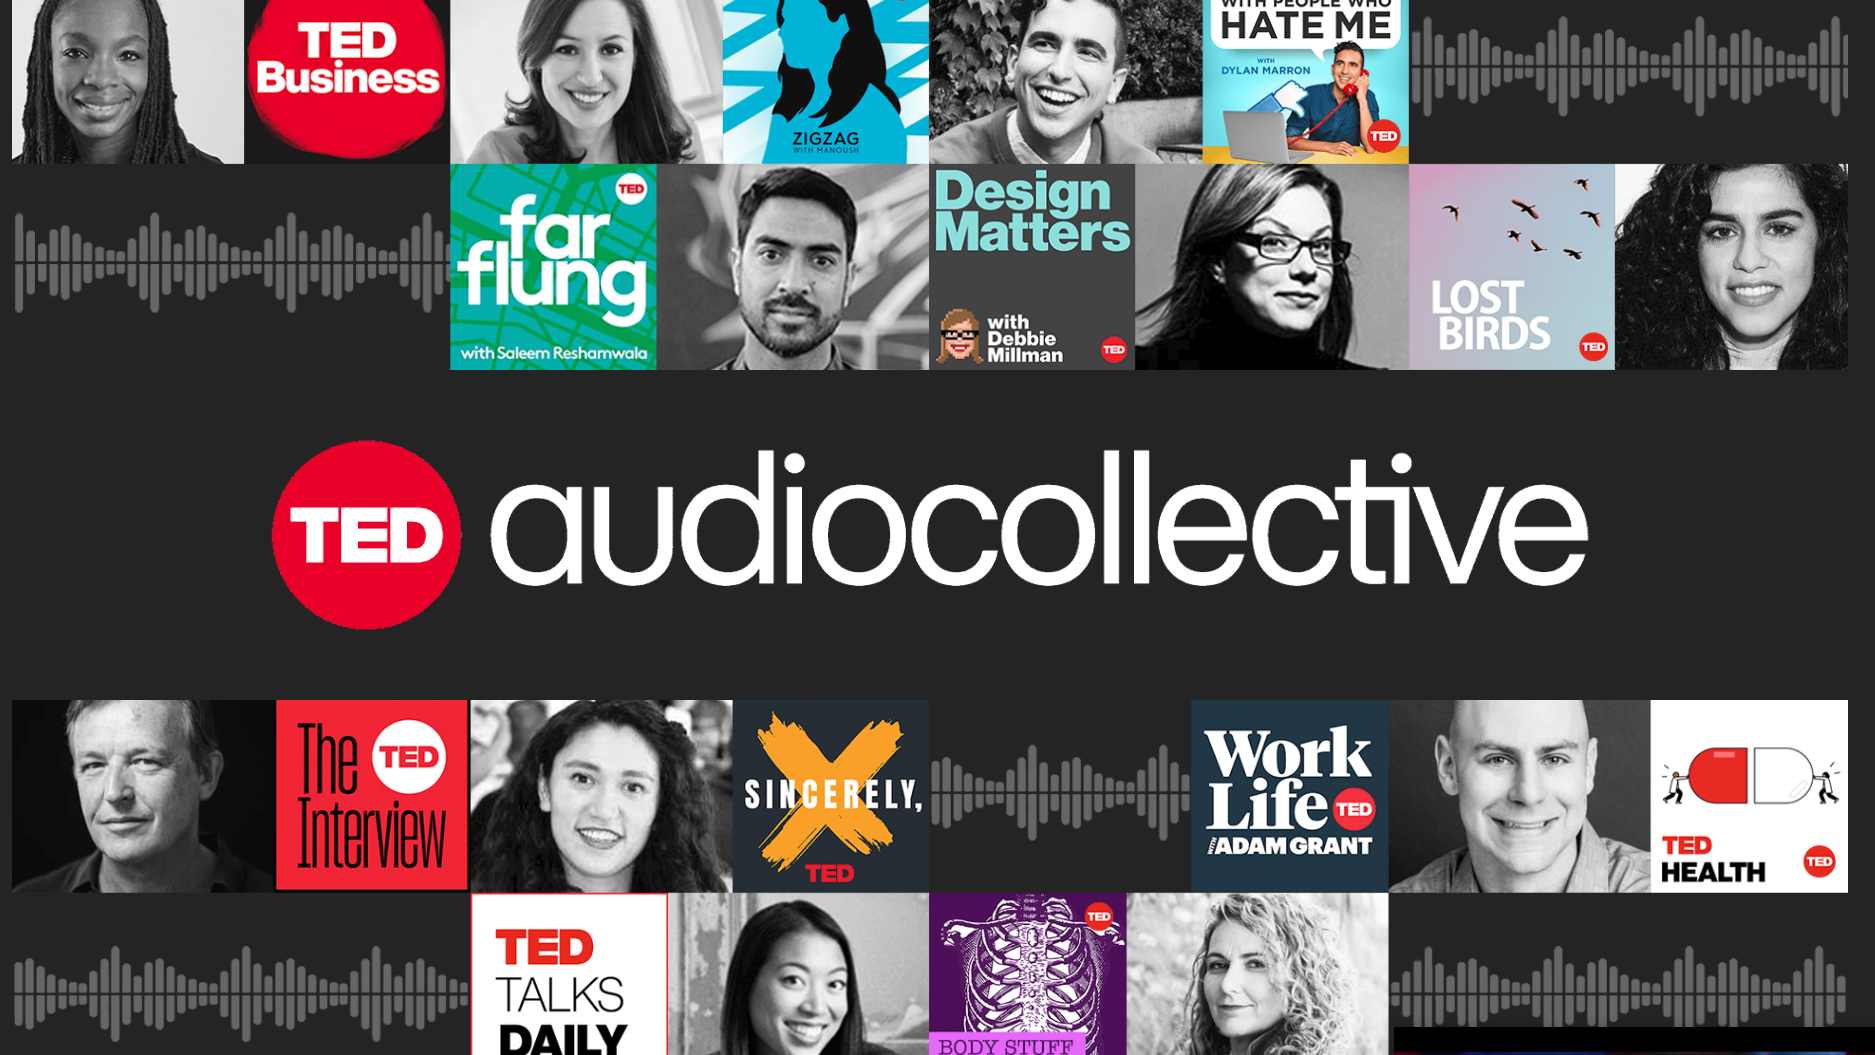 TED launches TED Audio Collective for podcasts about ‘ideas worth spreading’